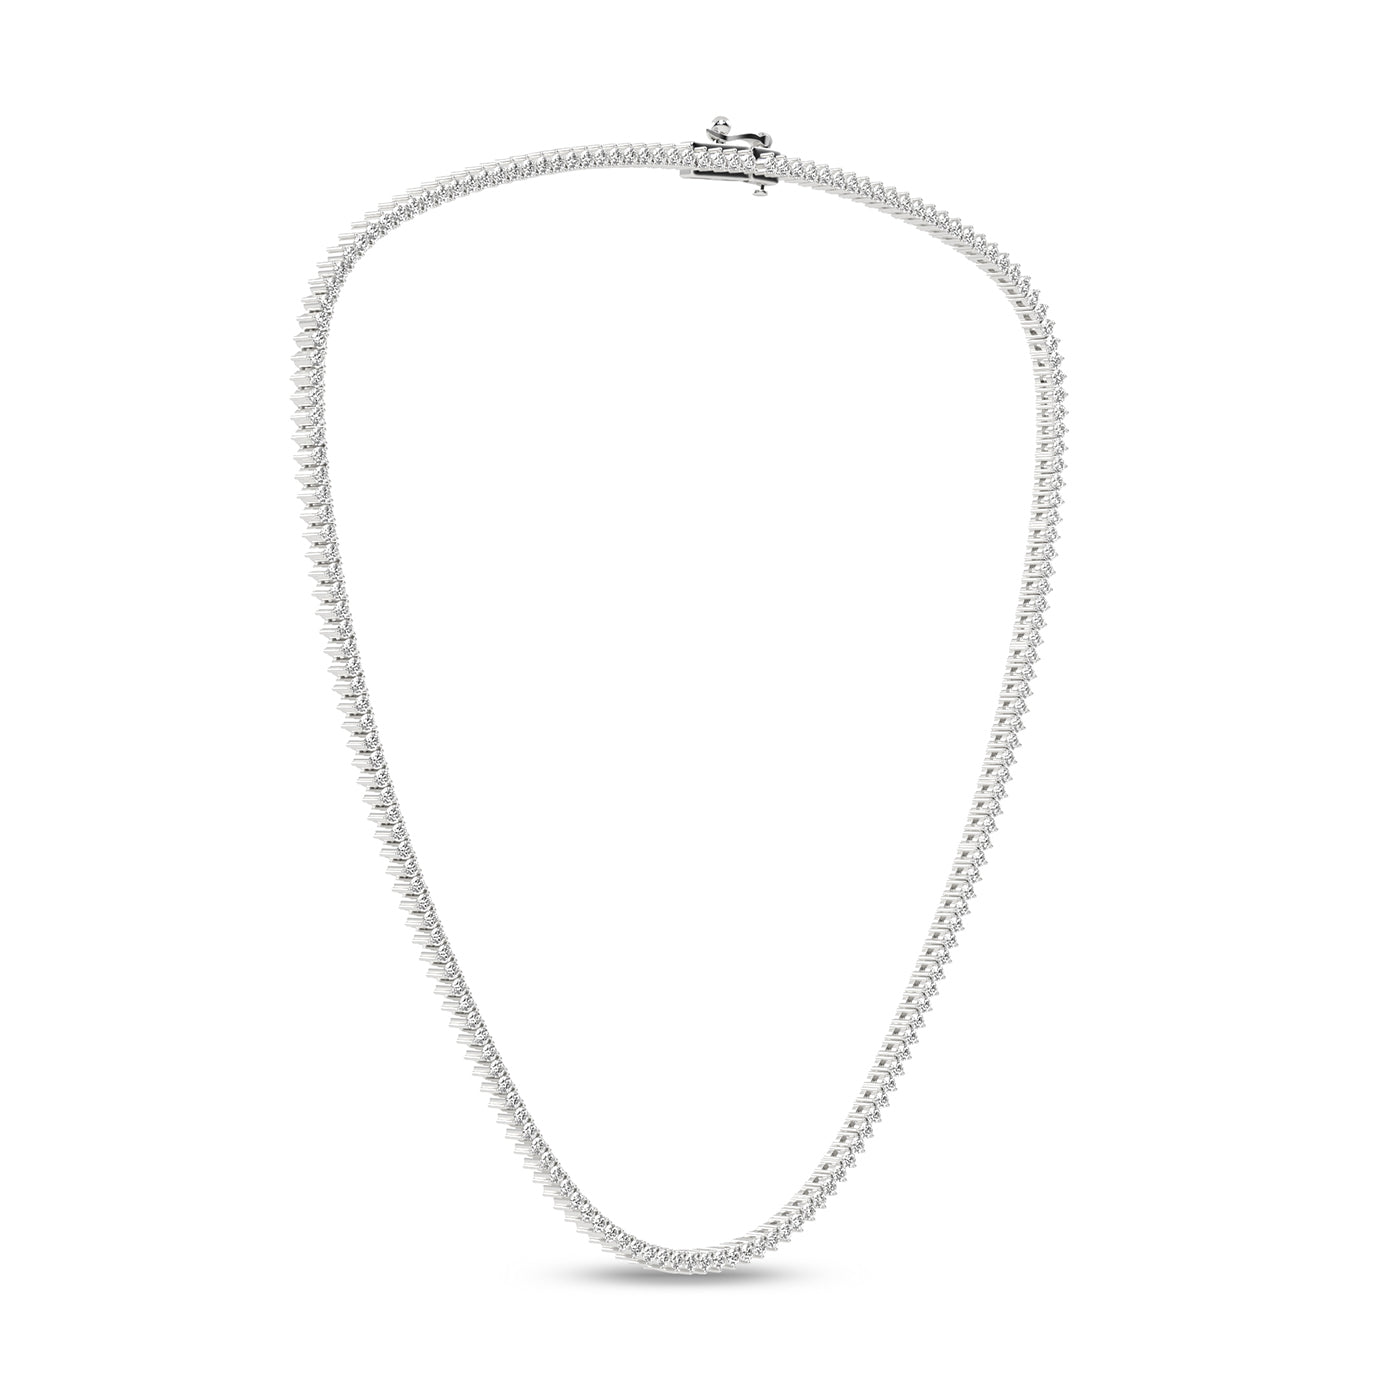 Graduated Atmos Tennis Necklace_Product Angle_6 Ct. - 3